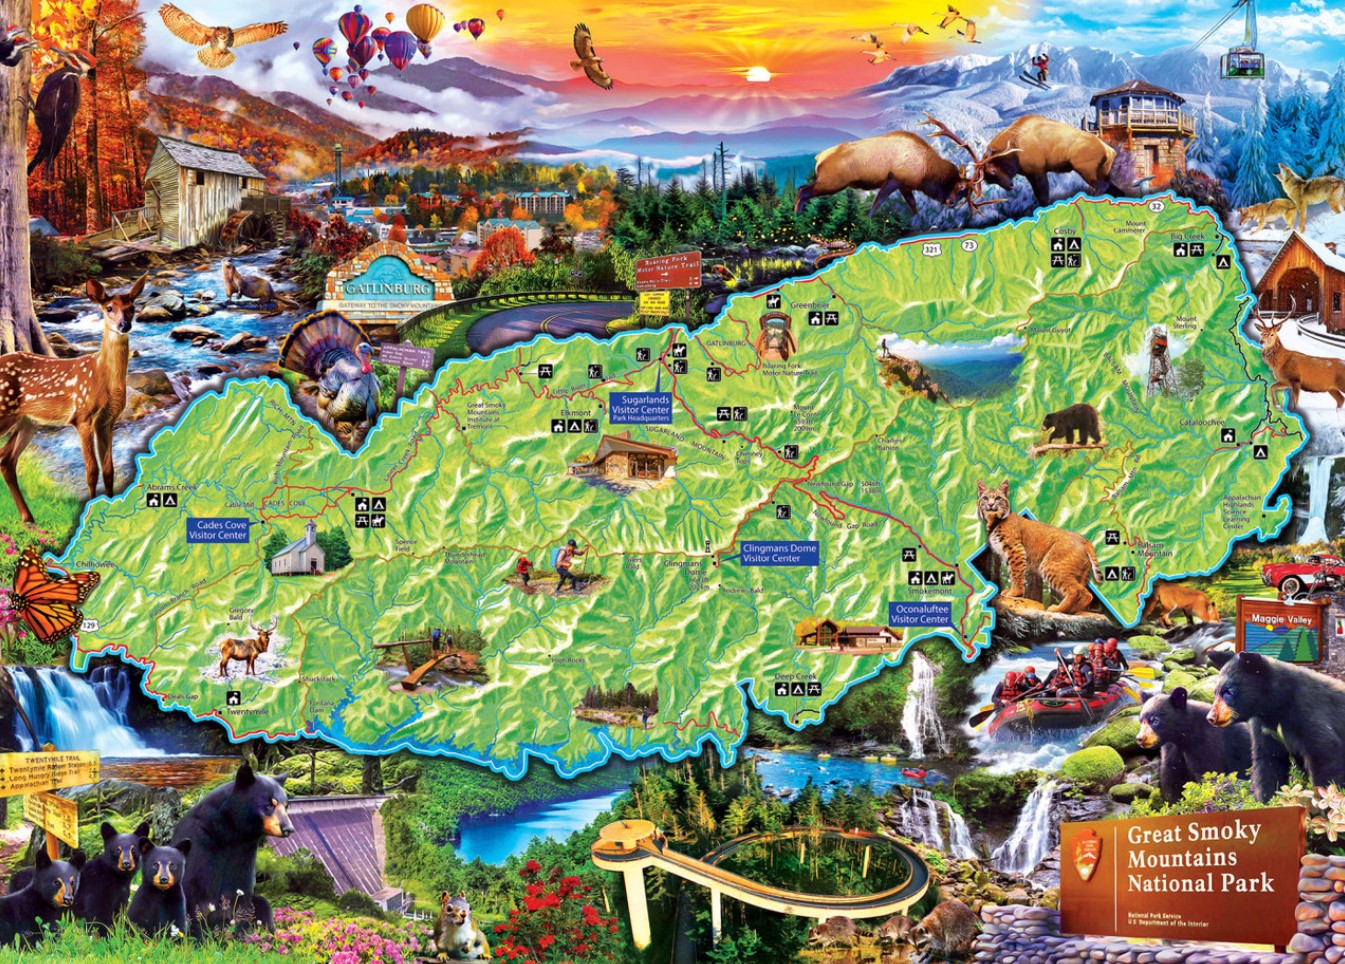 Great Smoky Mountains National Park - 1000 Piece Puzzle